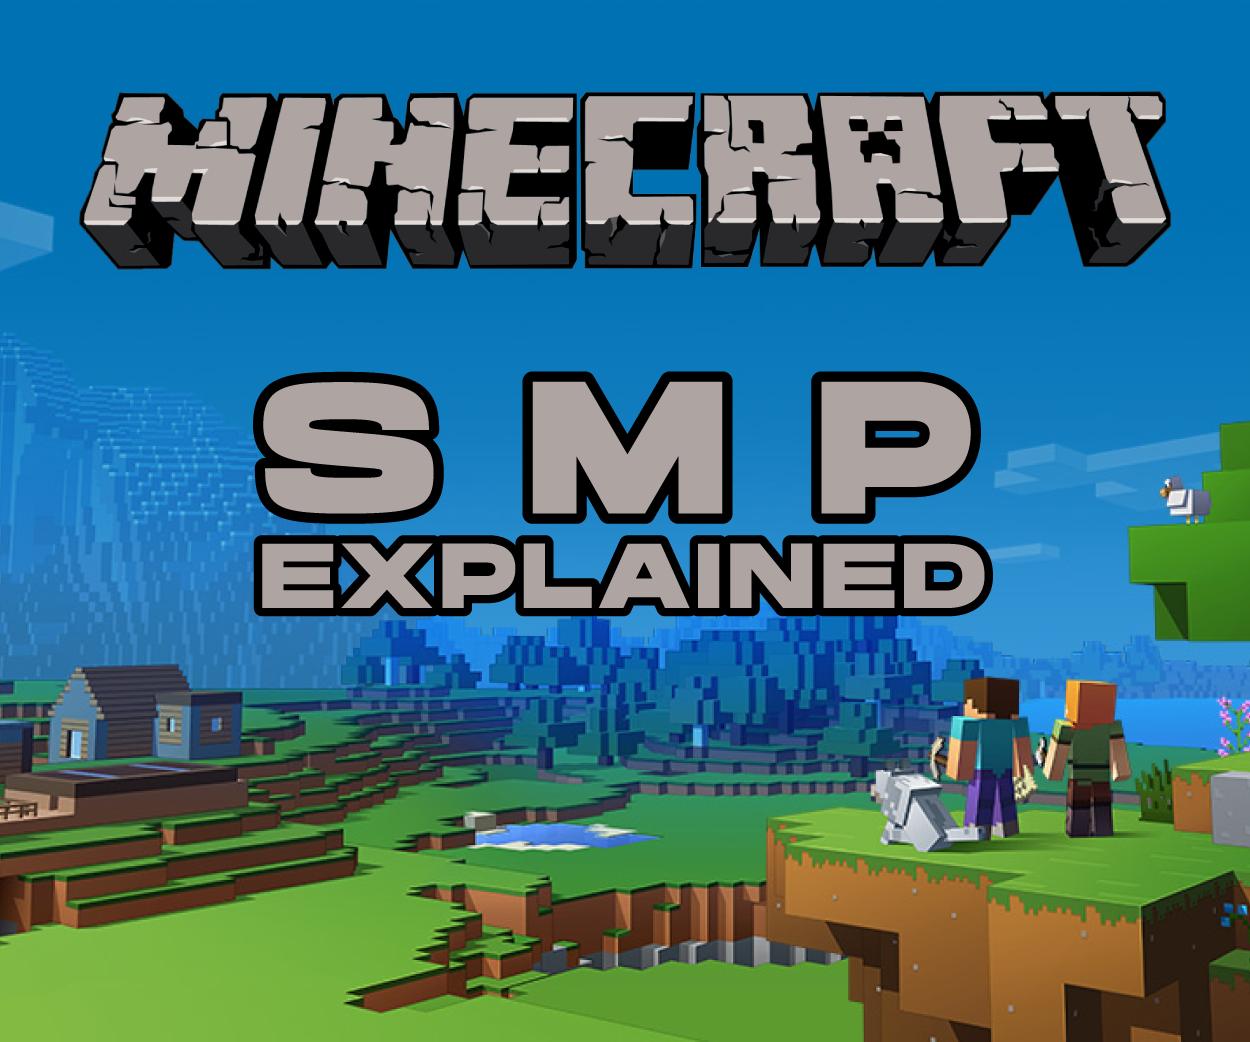 What Does Smp Stand For In Minecraft The Whole Dream Smp Explained Tremblzer World